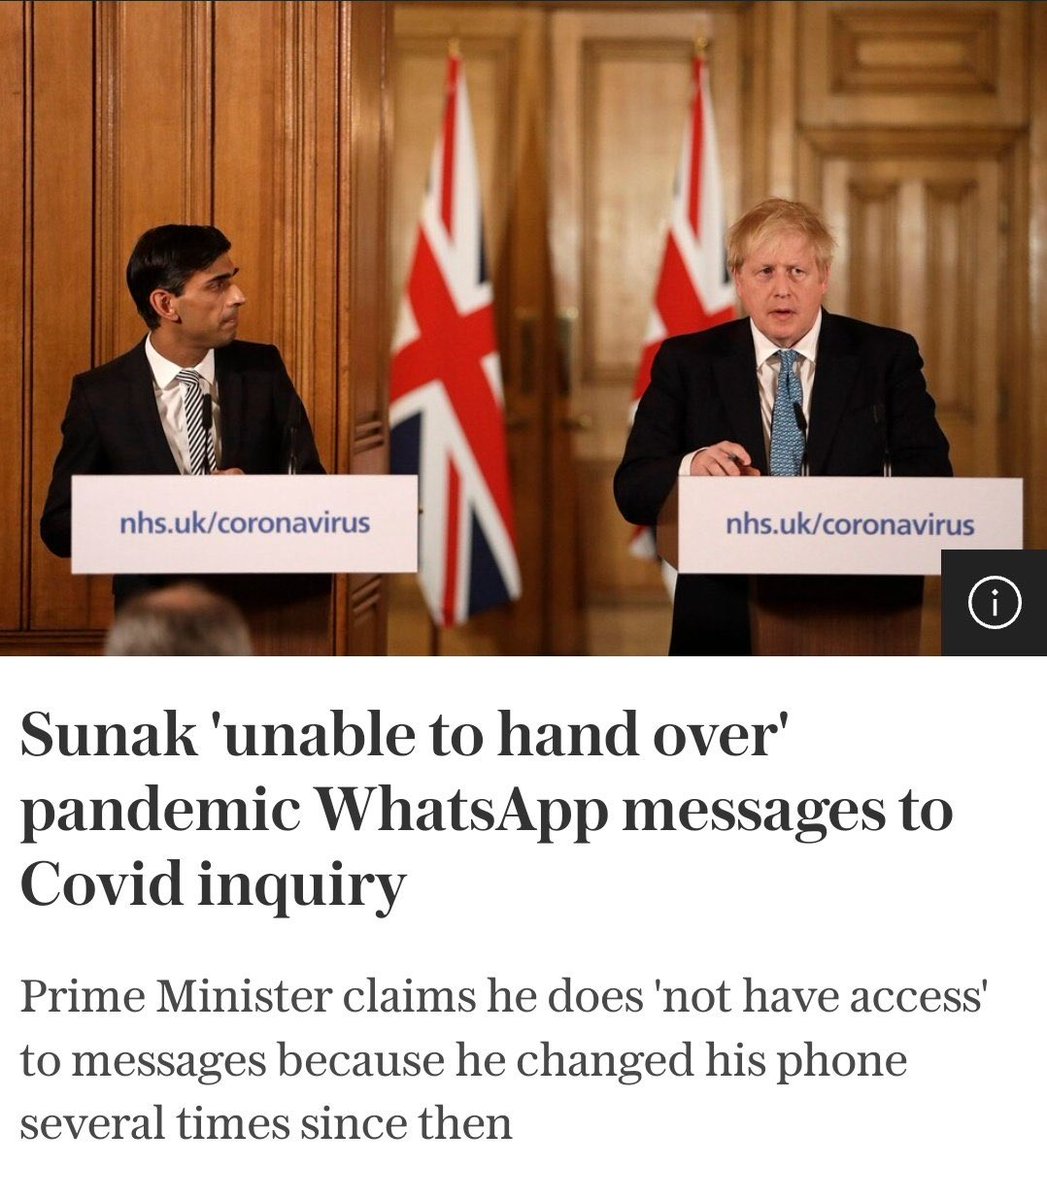 During Lockdowns as Chancellor, Rishi Sunak gave £2m in loans to companies owned by his wife, most went bankrupt defaulting on £1.76m. He made an up to £6bn deal with Moderna including gifting them £396m while having up to £500m of shares. And what else would that phone show?